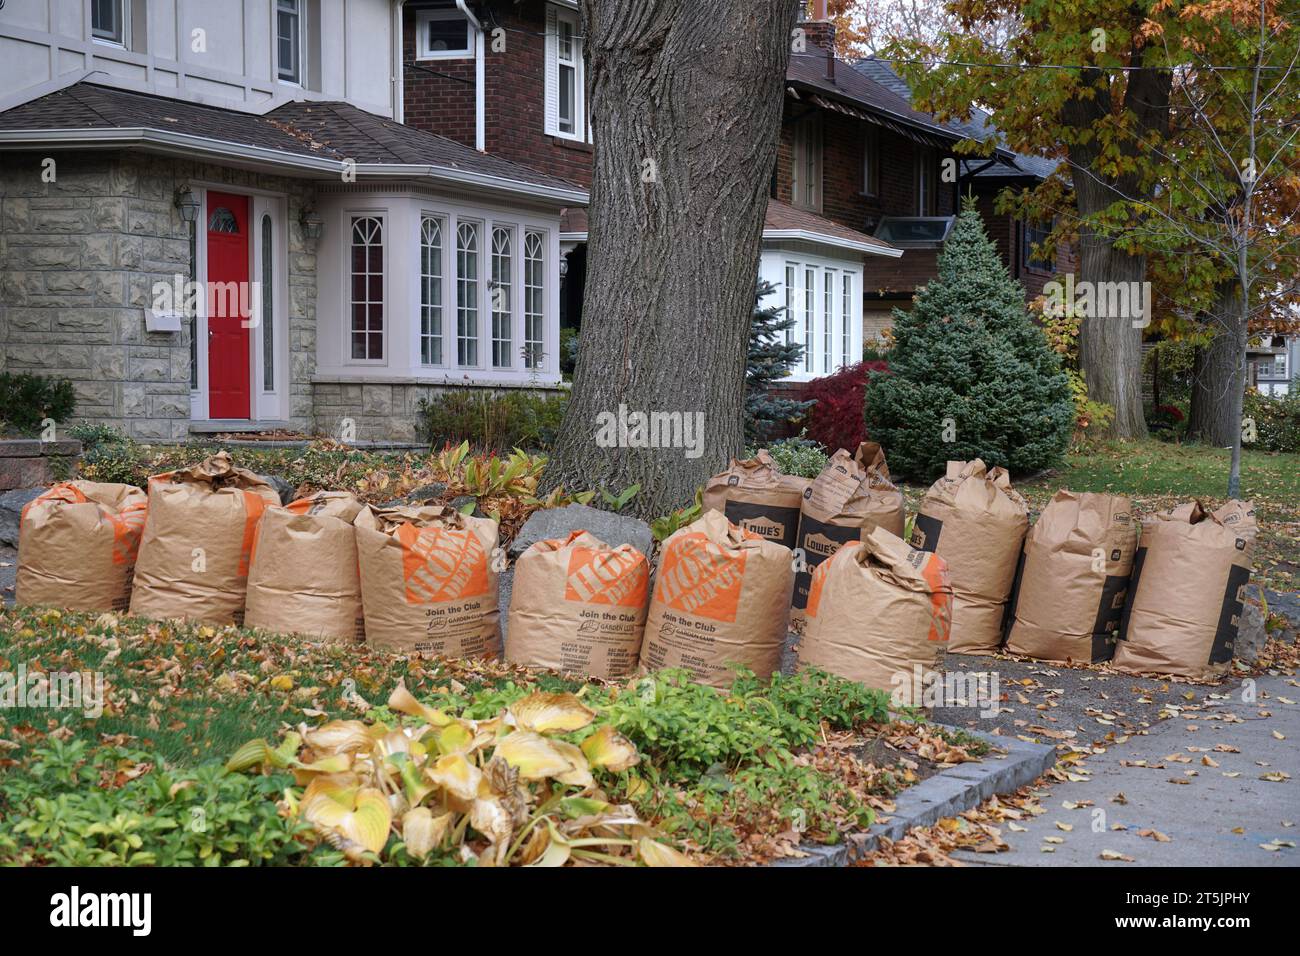 https://c8.alamy.com/comp/2T5JPHY/residential-street-with-autumn-leaf-collection-bags-2T5JPHY.jpg